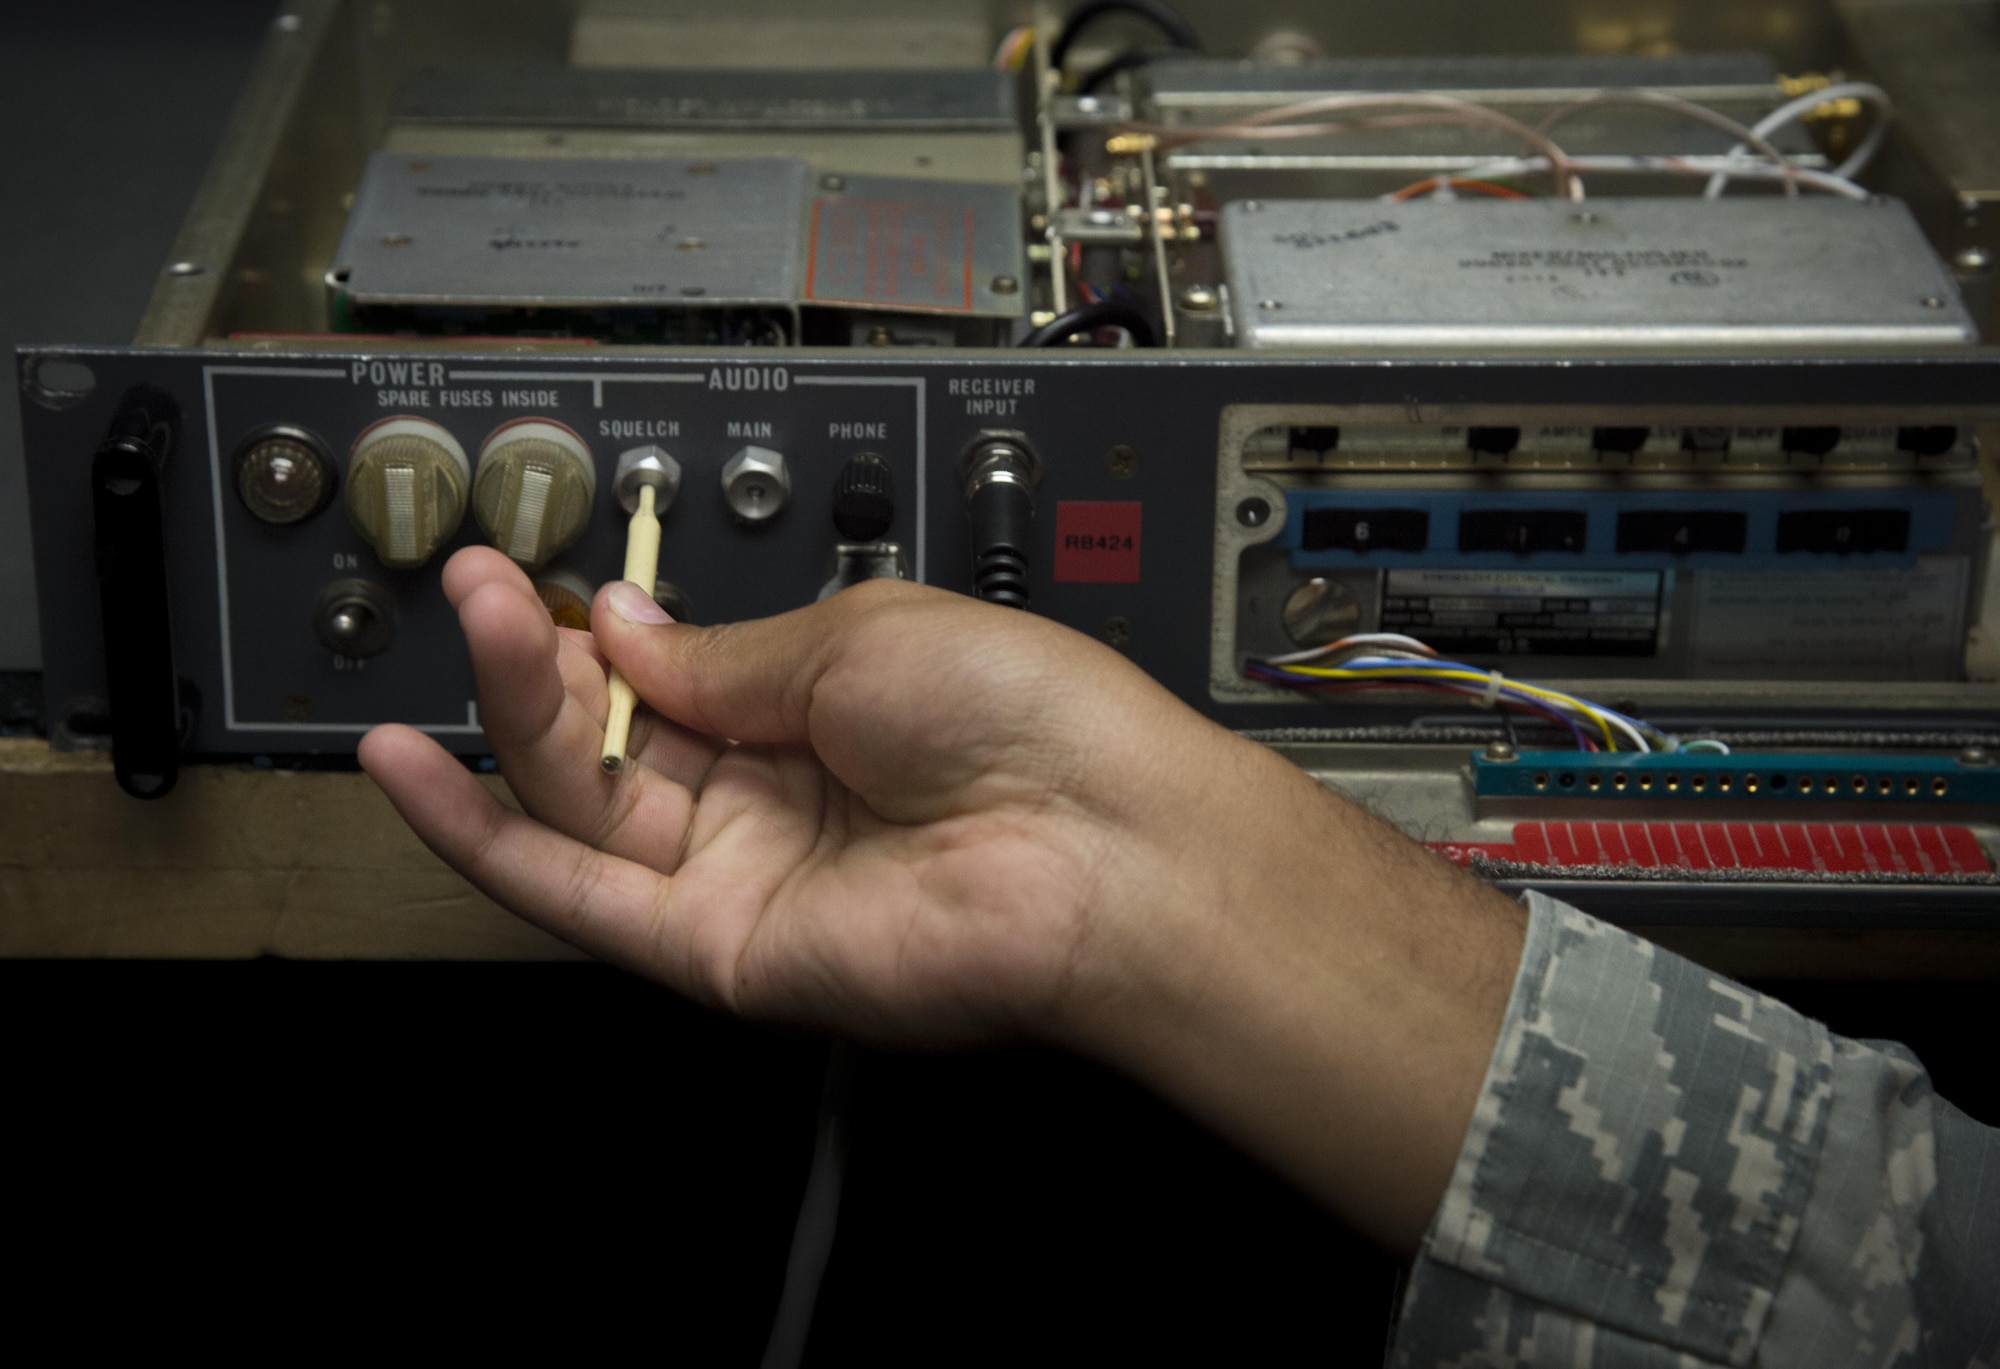 Airman 1st Class Keith Hickson Jr., a cable and antenna maintenance technician assigned to the 6th Communications Squadron, adjusts a radio during a Shadow Program at MacDill Air Force Base, Fla. Oct. 18, 2017. Hickson toured various work areas during the day to include air traffic control, weather, and Survival Evasion Resistance and Escape specialists and learned about each career field. (U.S. Air Force photo by Senior Airman Mariette Adams)